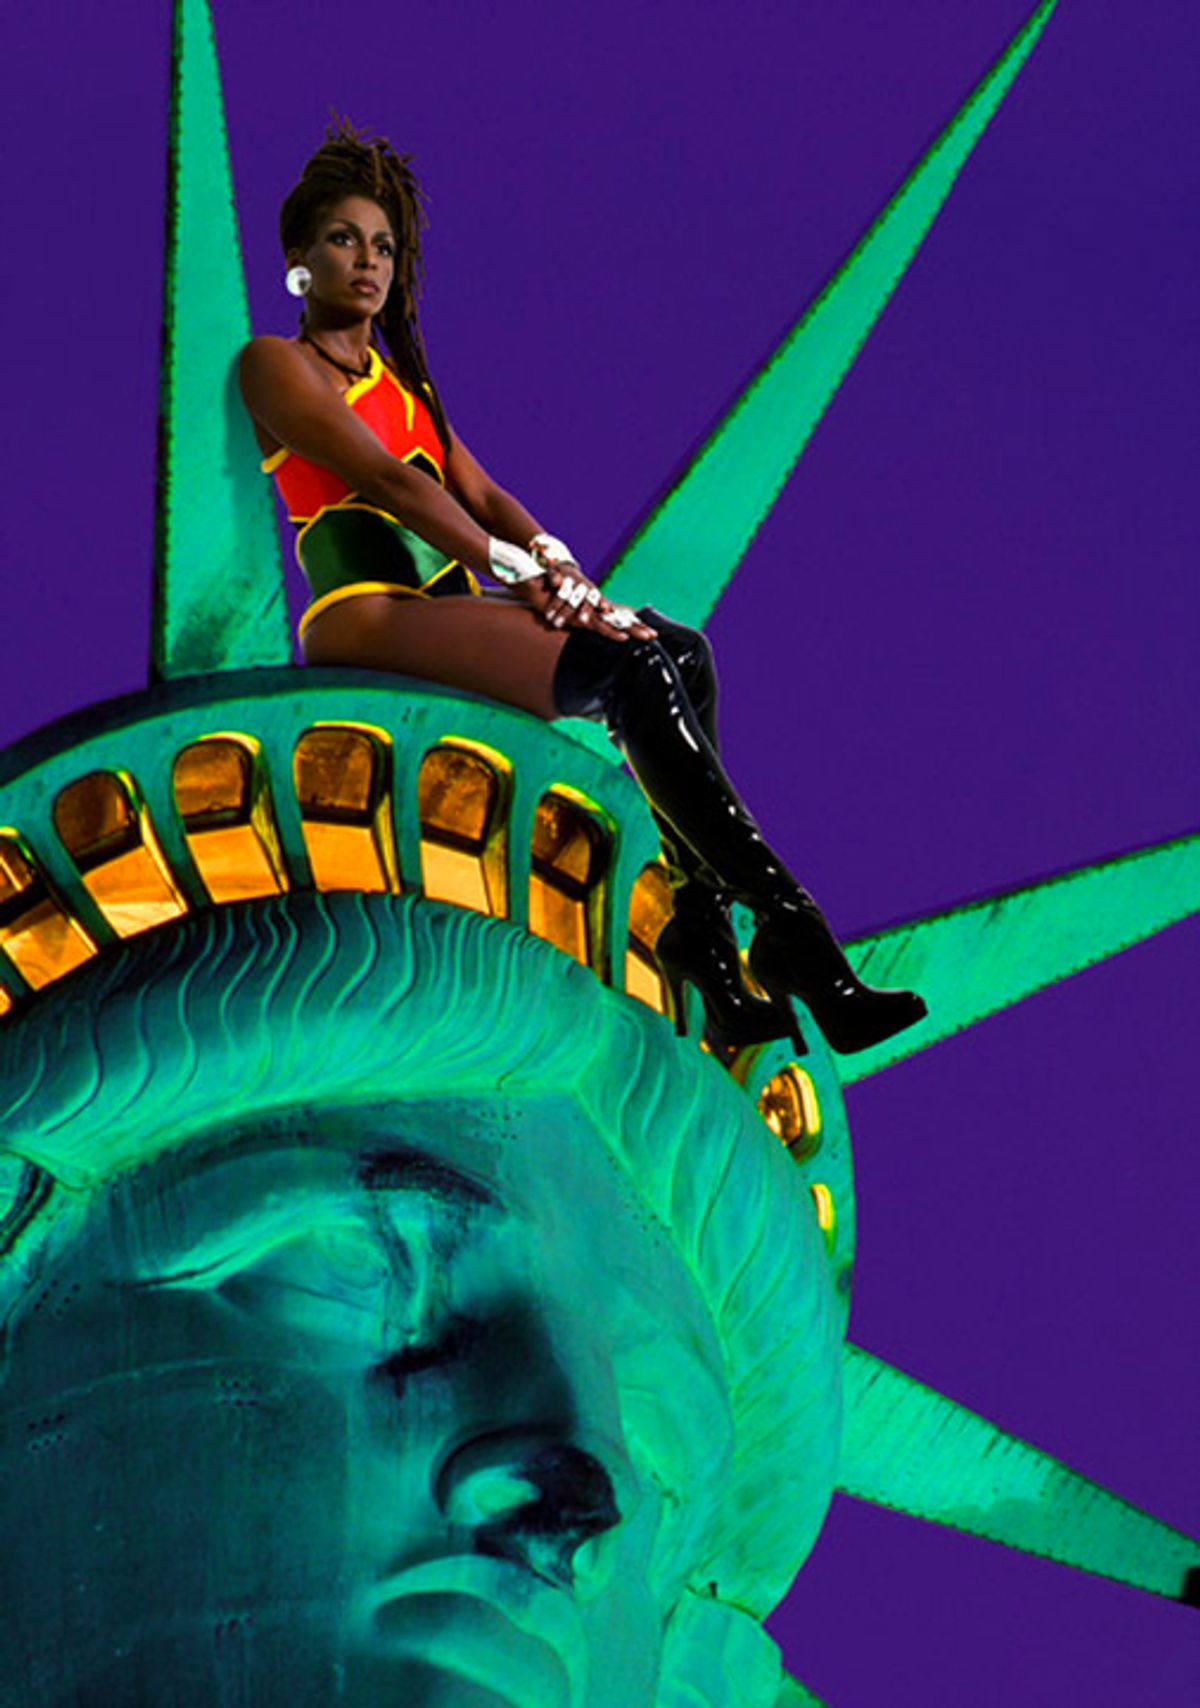 Renee Cox, Chillin' with Lady Liberty (1998) Courtesy Renee Cox